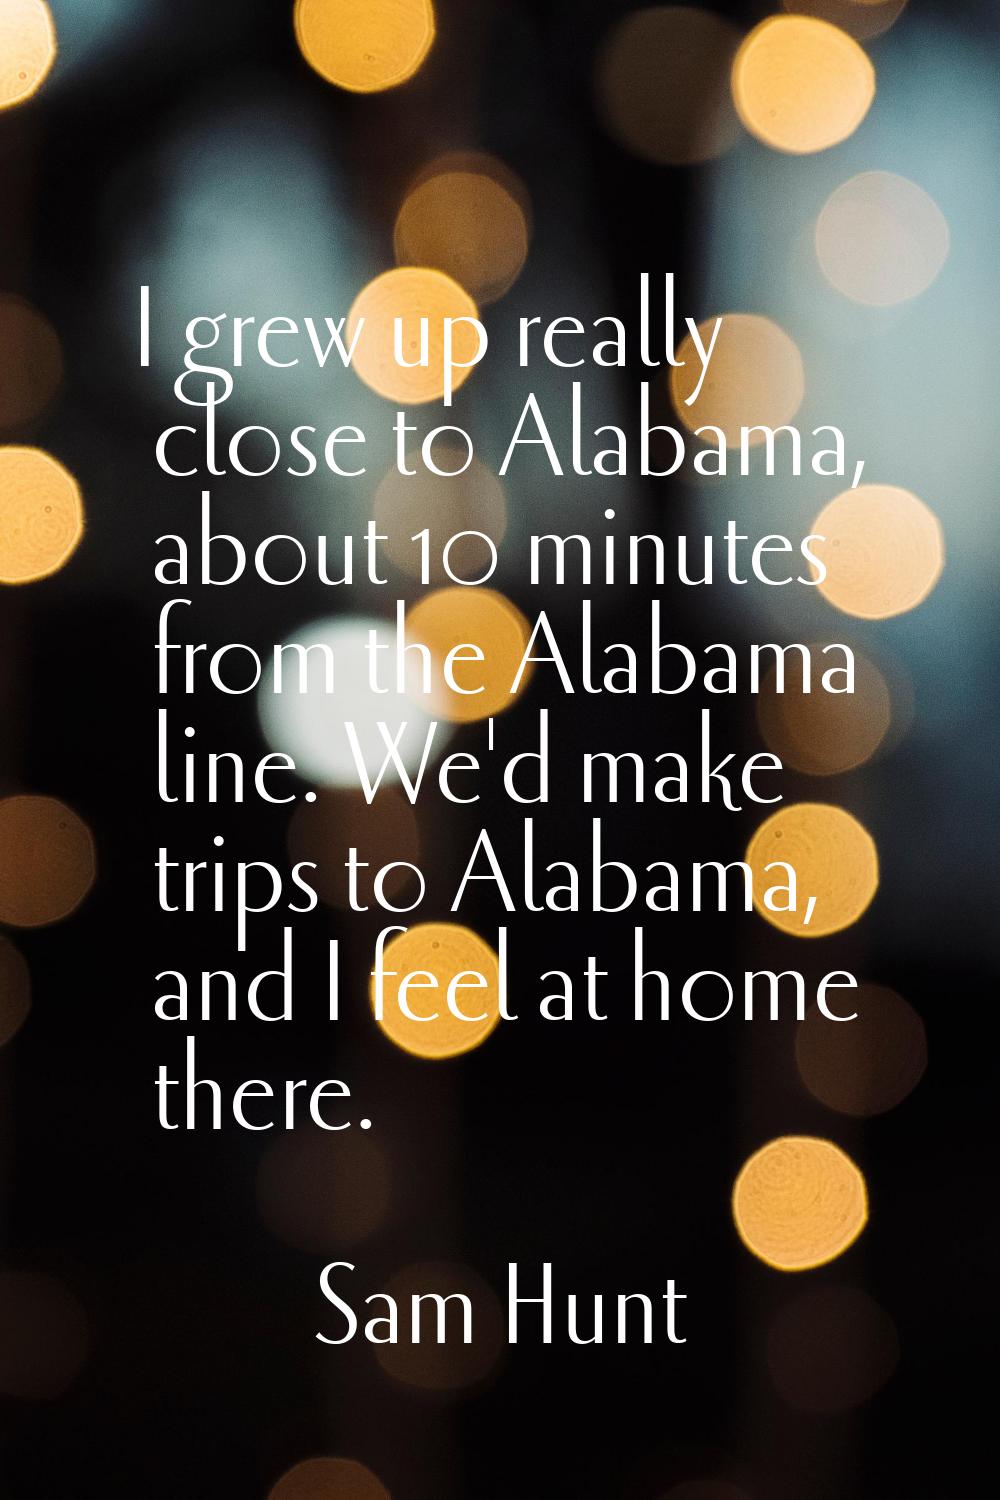 I grew up really close to Alabama, about 10 minutes from the Alabama line. We'd make trips to Alaba